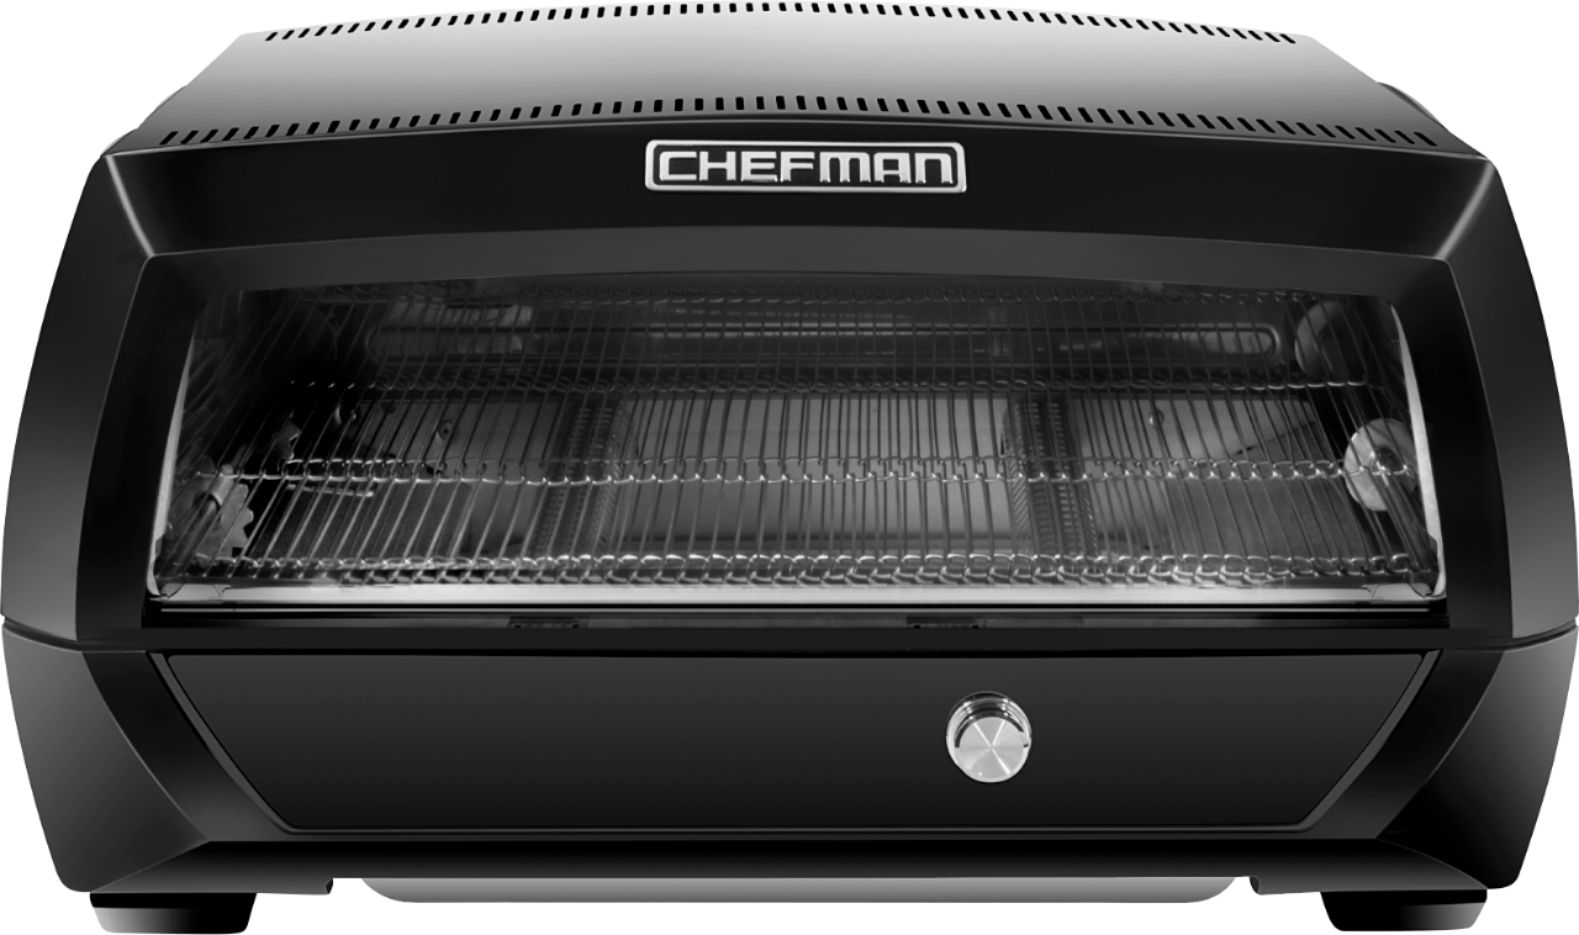 Left View: Chefman Food Mover Conveyor Toaster Oven - Black/Stainless Steel